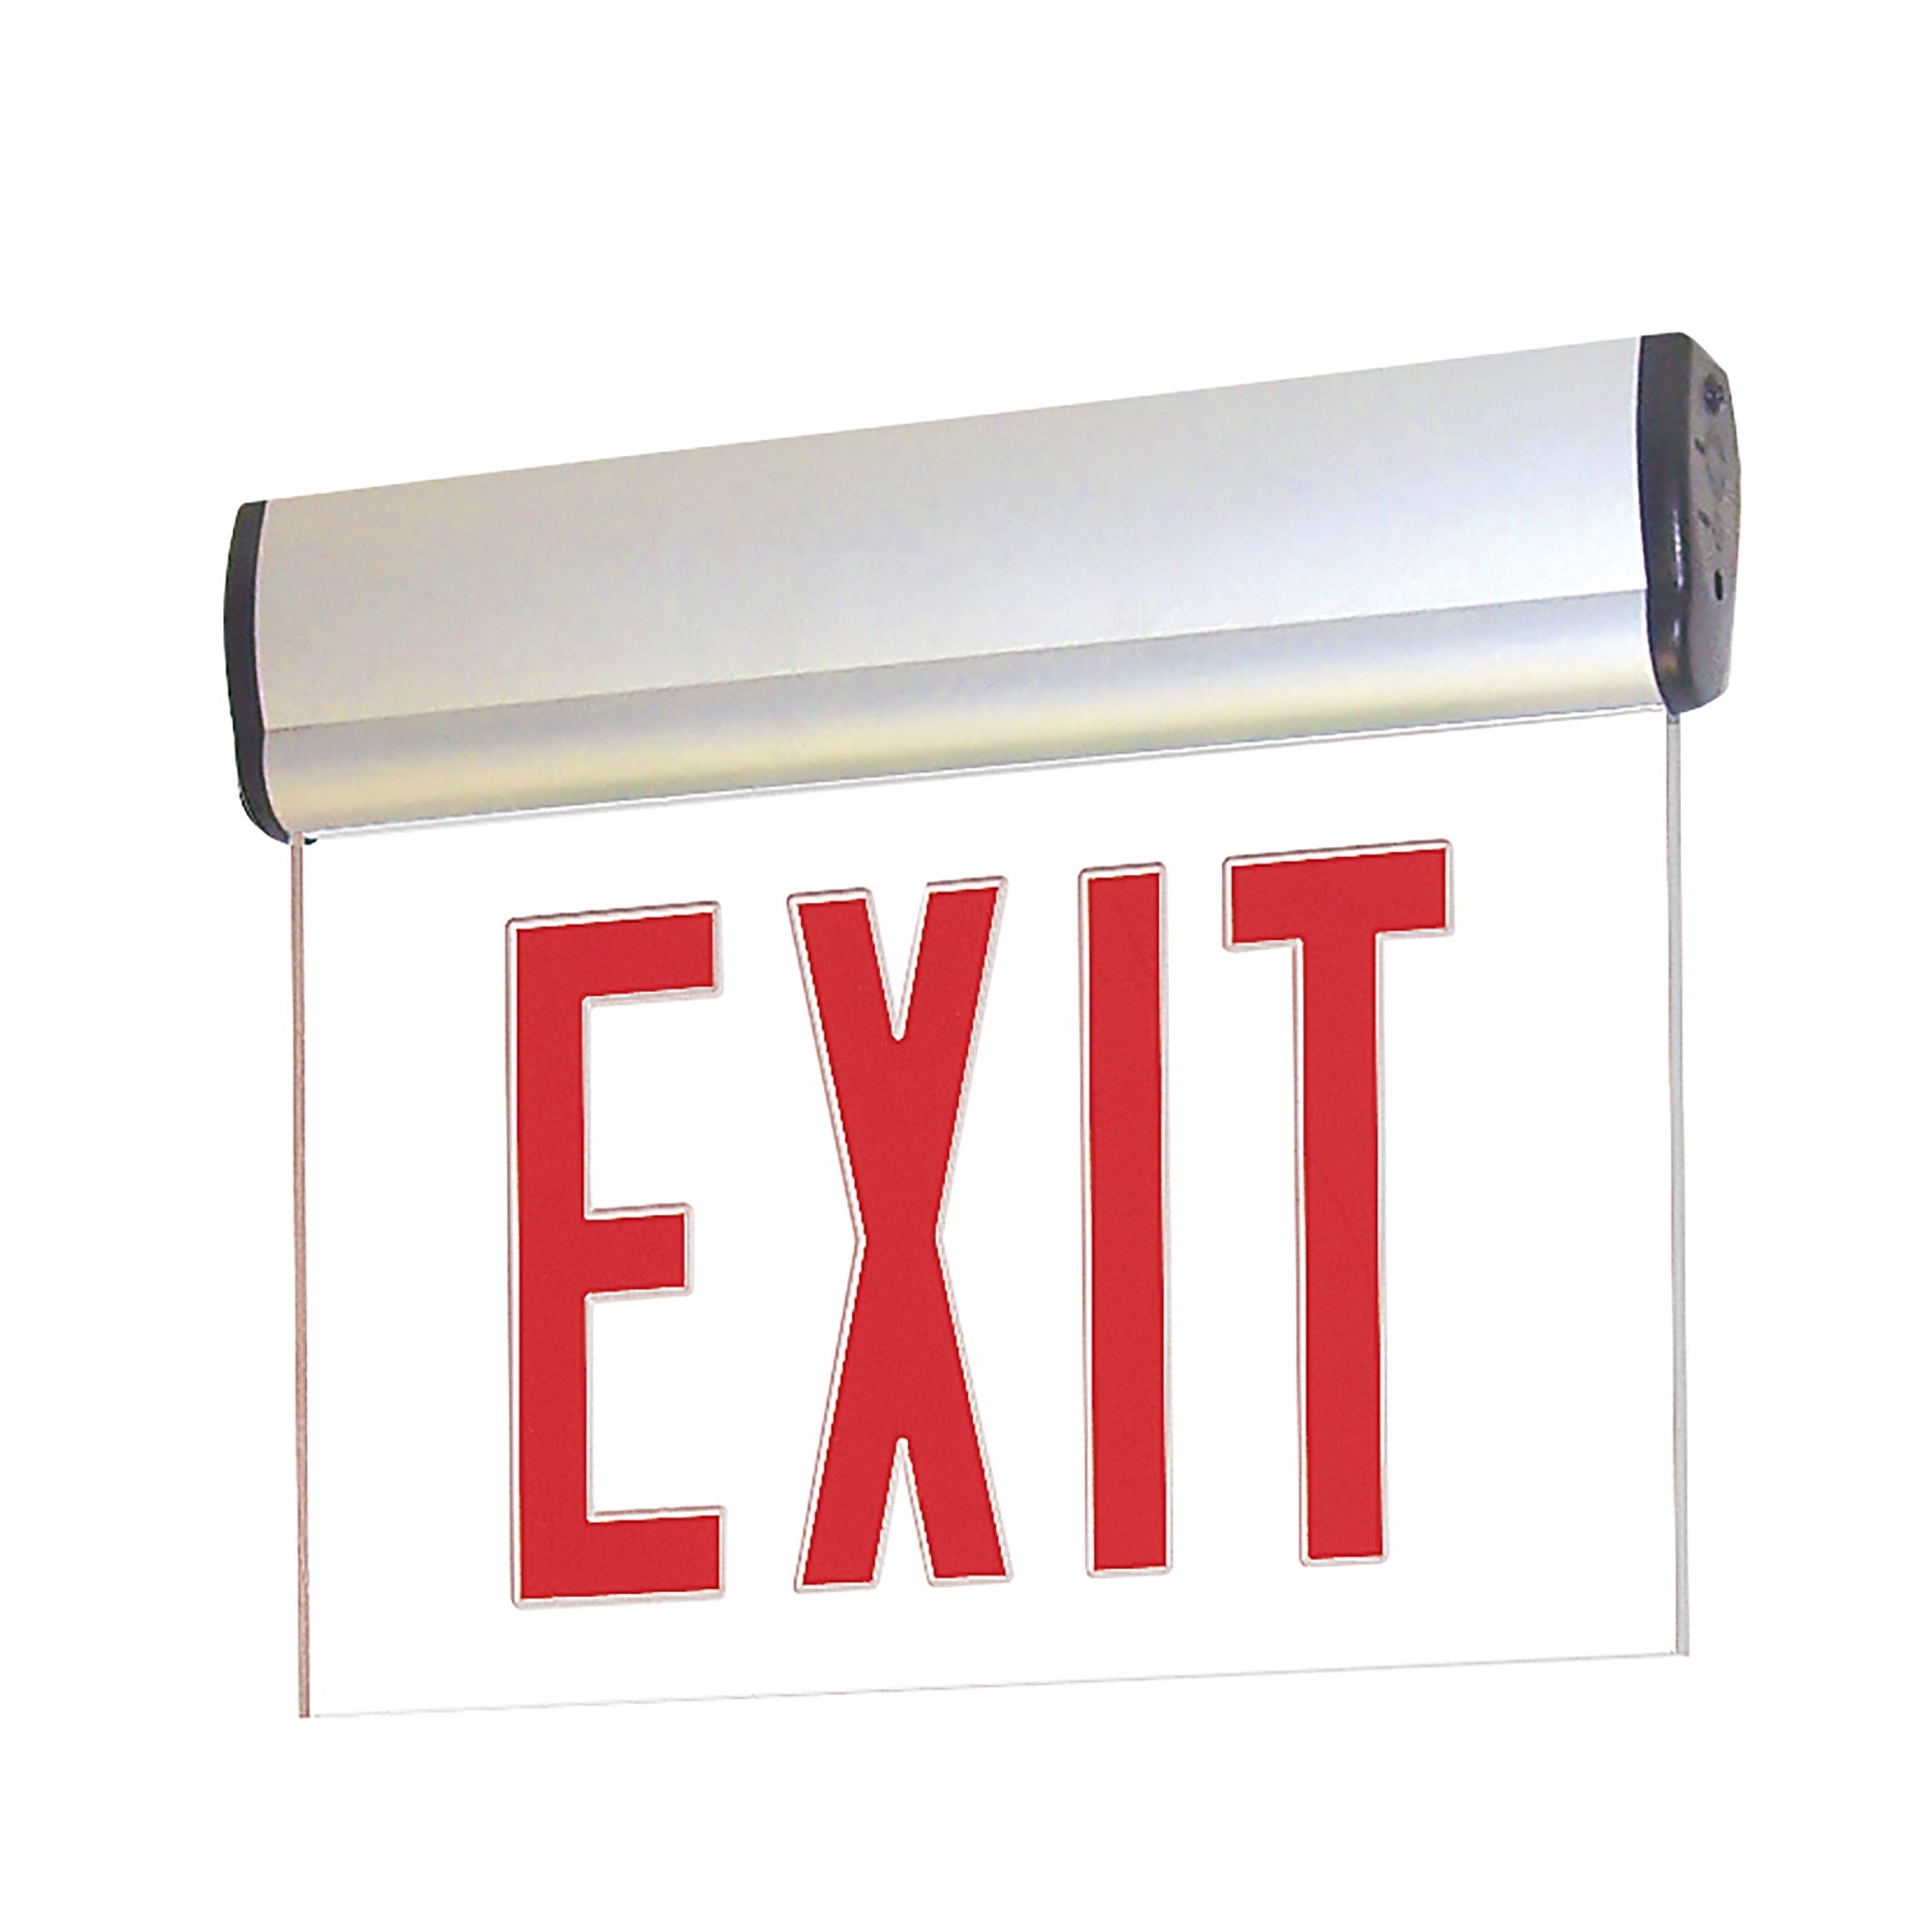 Nora Lighting NX-812-LEDRCA - Exit / Emergency - Surface Adjustable LED Edge-Lit Exit Sign, Battery Backup, 6 Inch Red Letters, Single Face / Clear Acrylic, Aluminum Housing